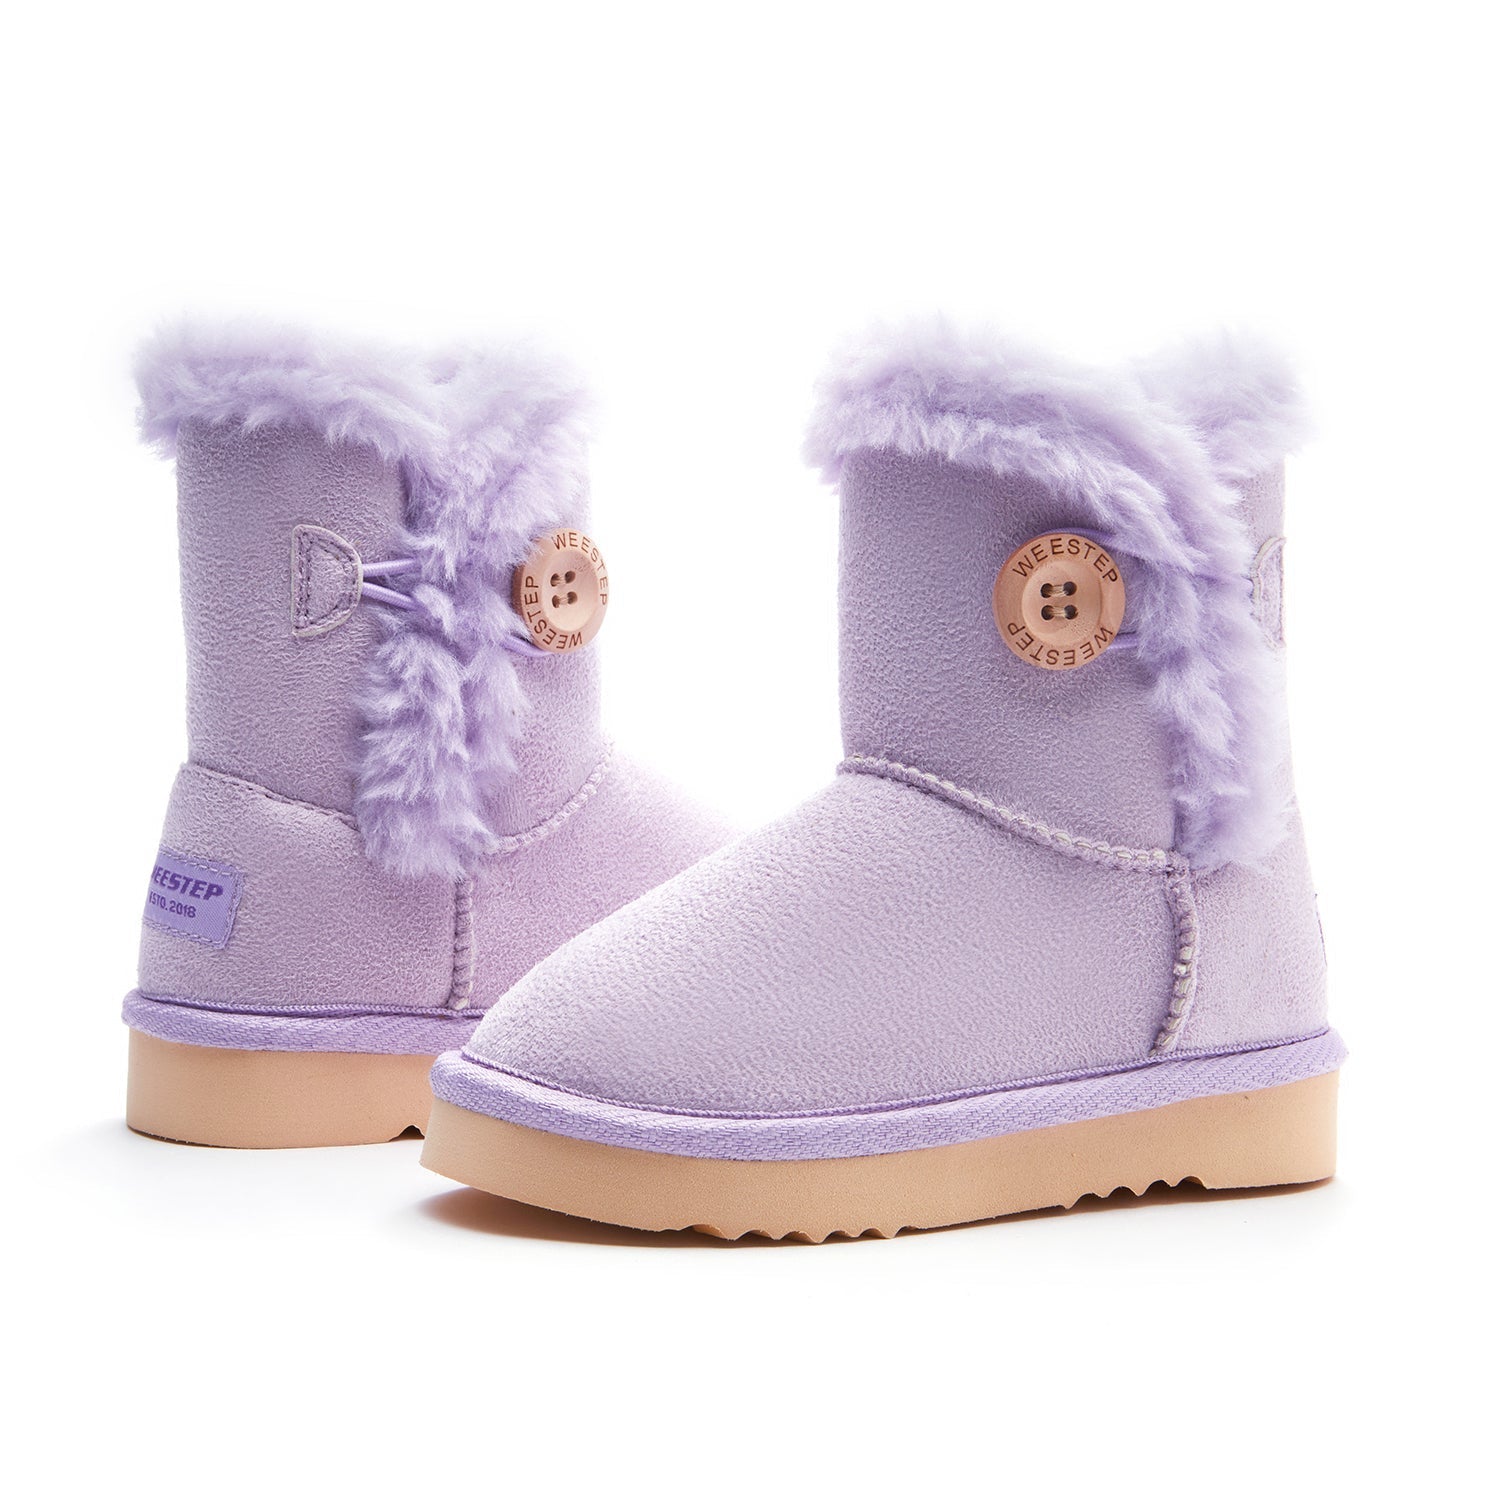 Toddler Little Kid Classic Button Snow Boots